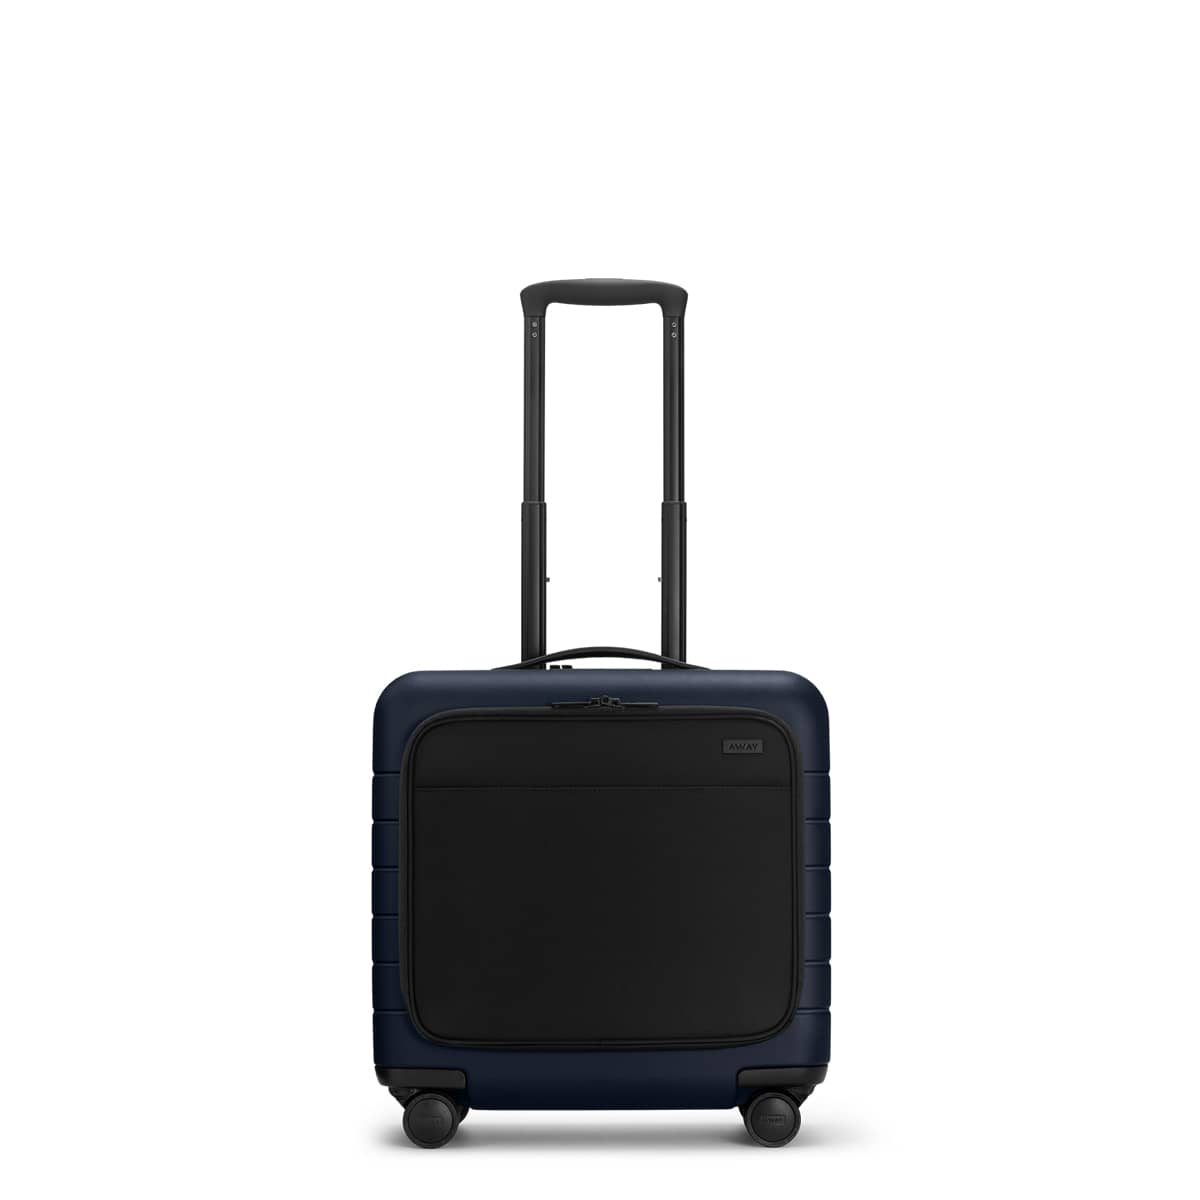 Best Small Carry-On Luggage